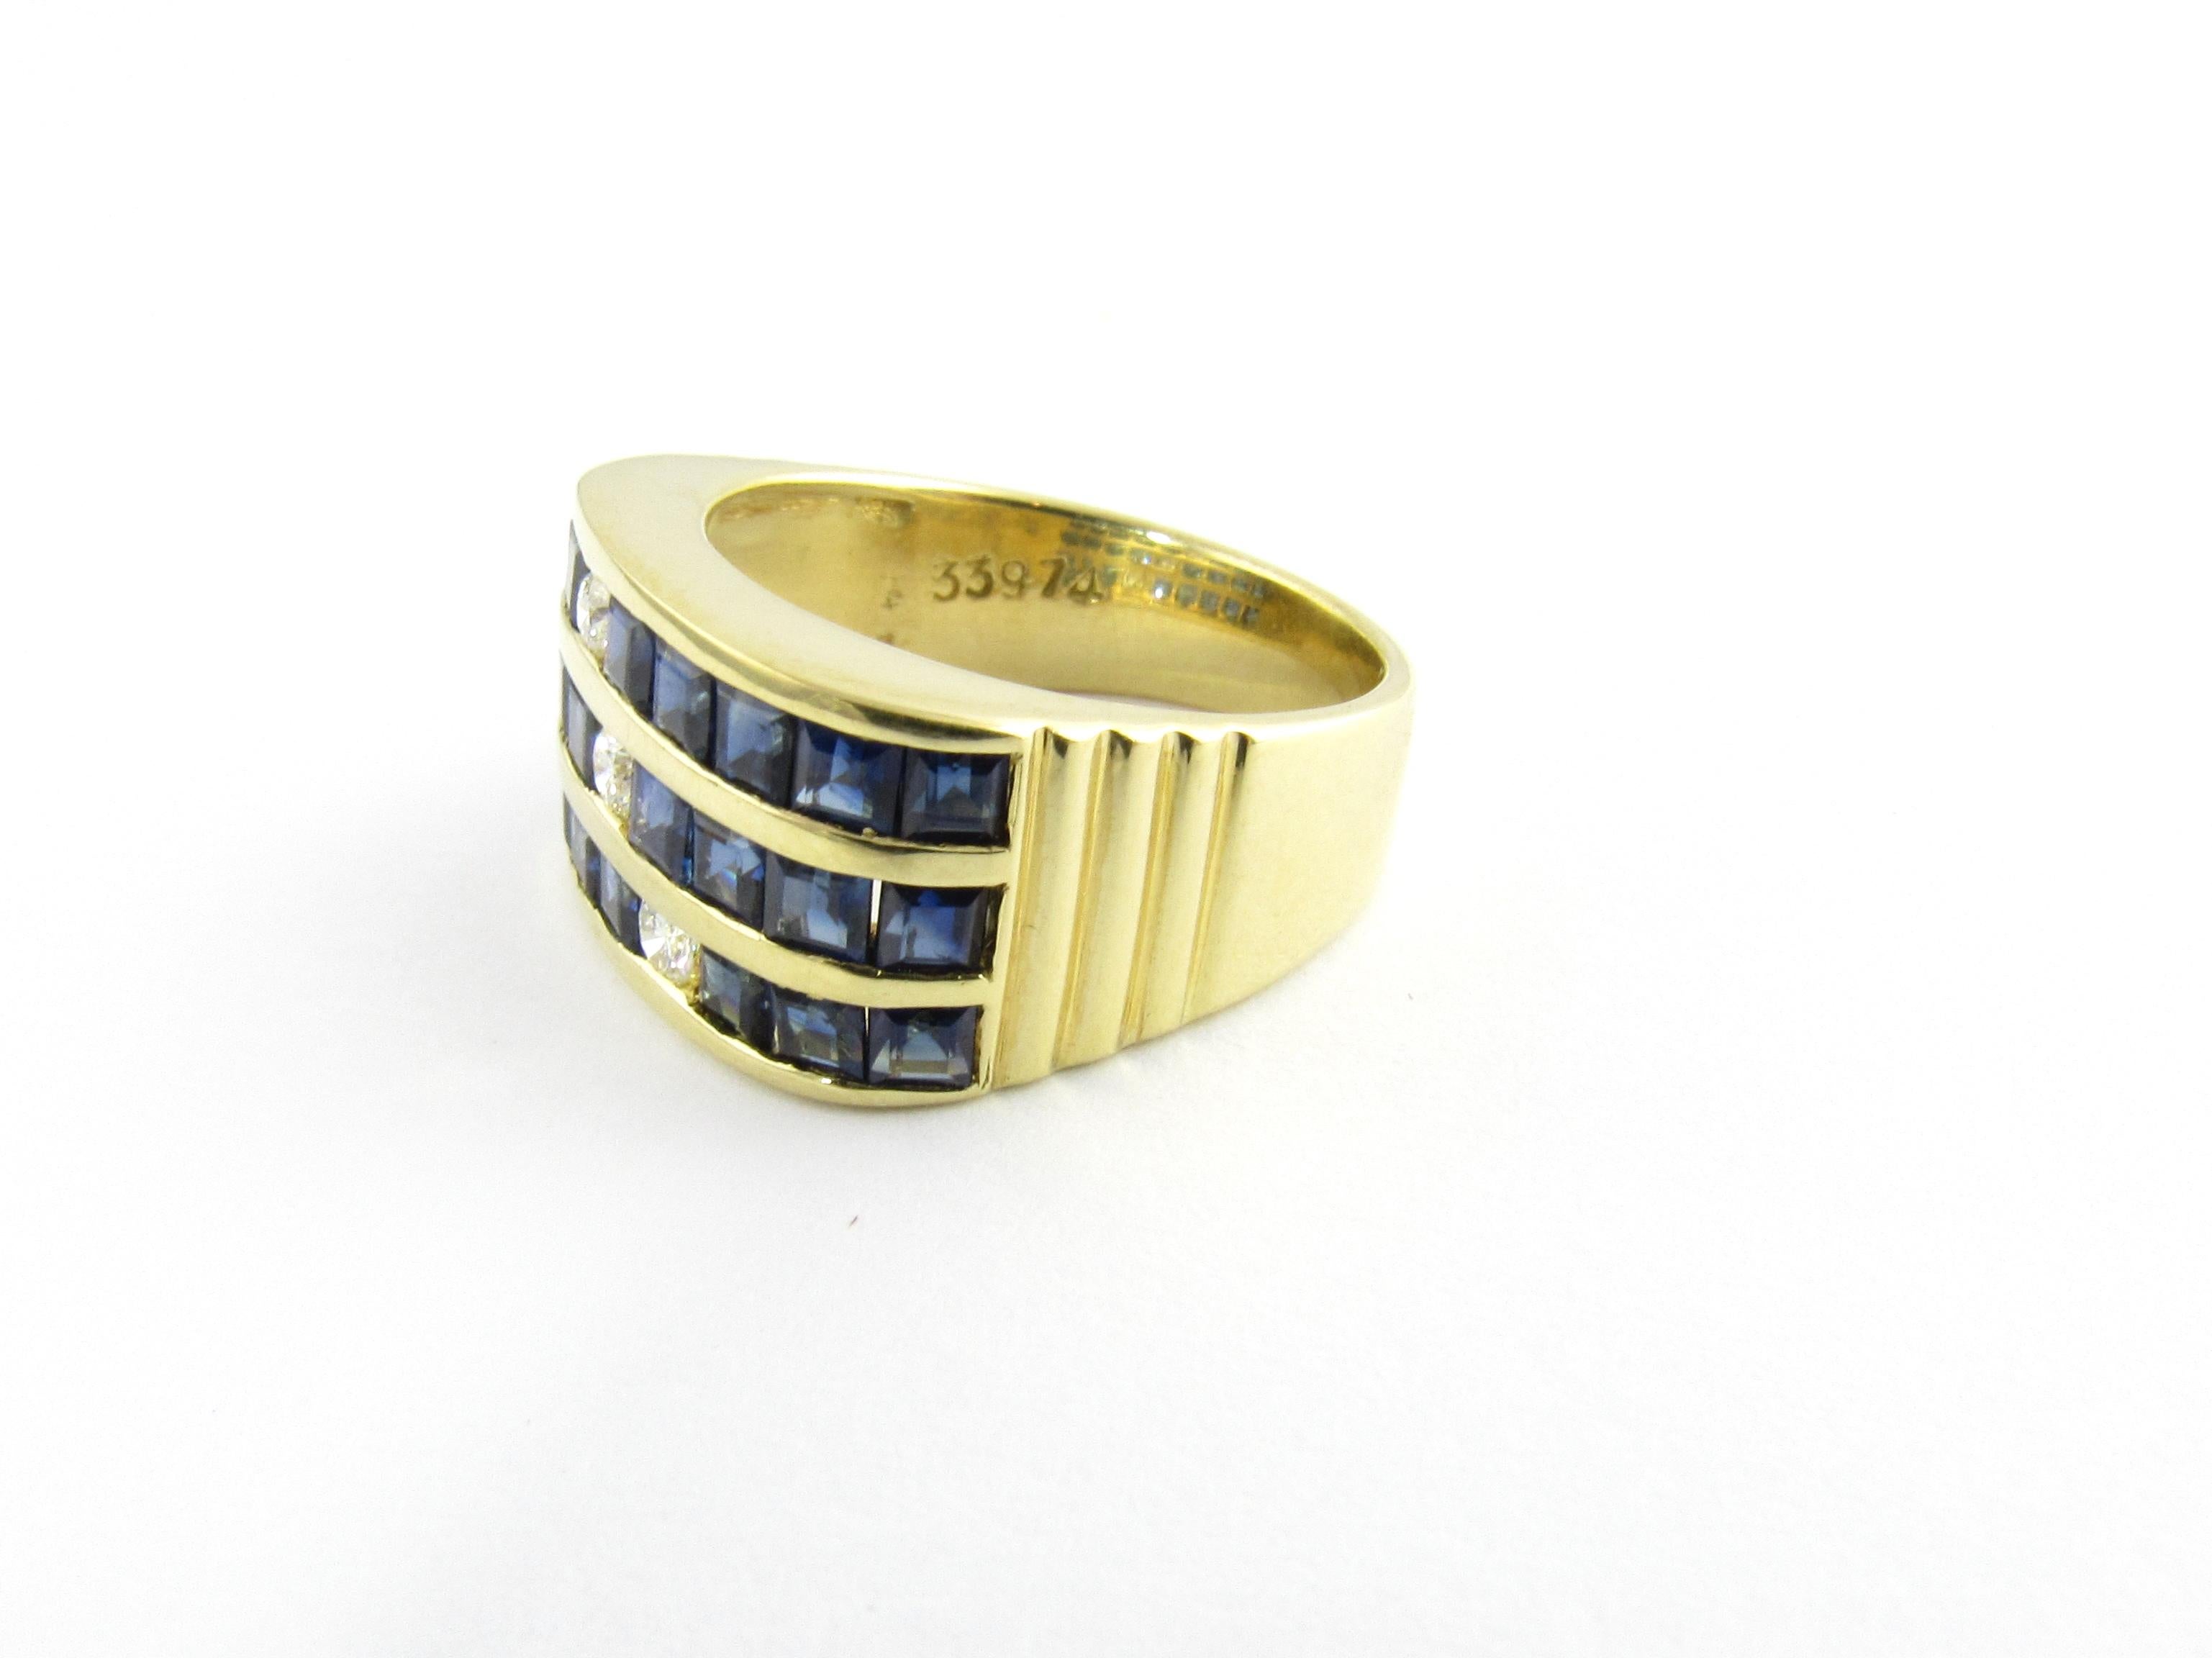 Vintage 18 Karat Yellow Gold Sapphire and Diamond Ring Size 7

This lovely ring features 24 princess cut sapphires and three round brilliant cut diamonds set in beautifully detailed 18K yellow gold. Width: 11 mm. Shank: 5 mm.

Approximate total